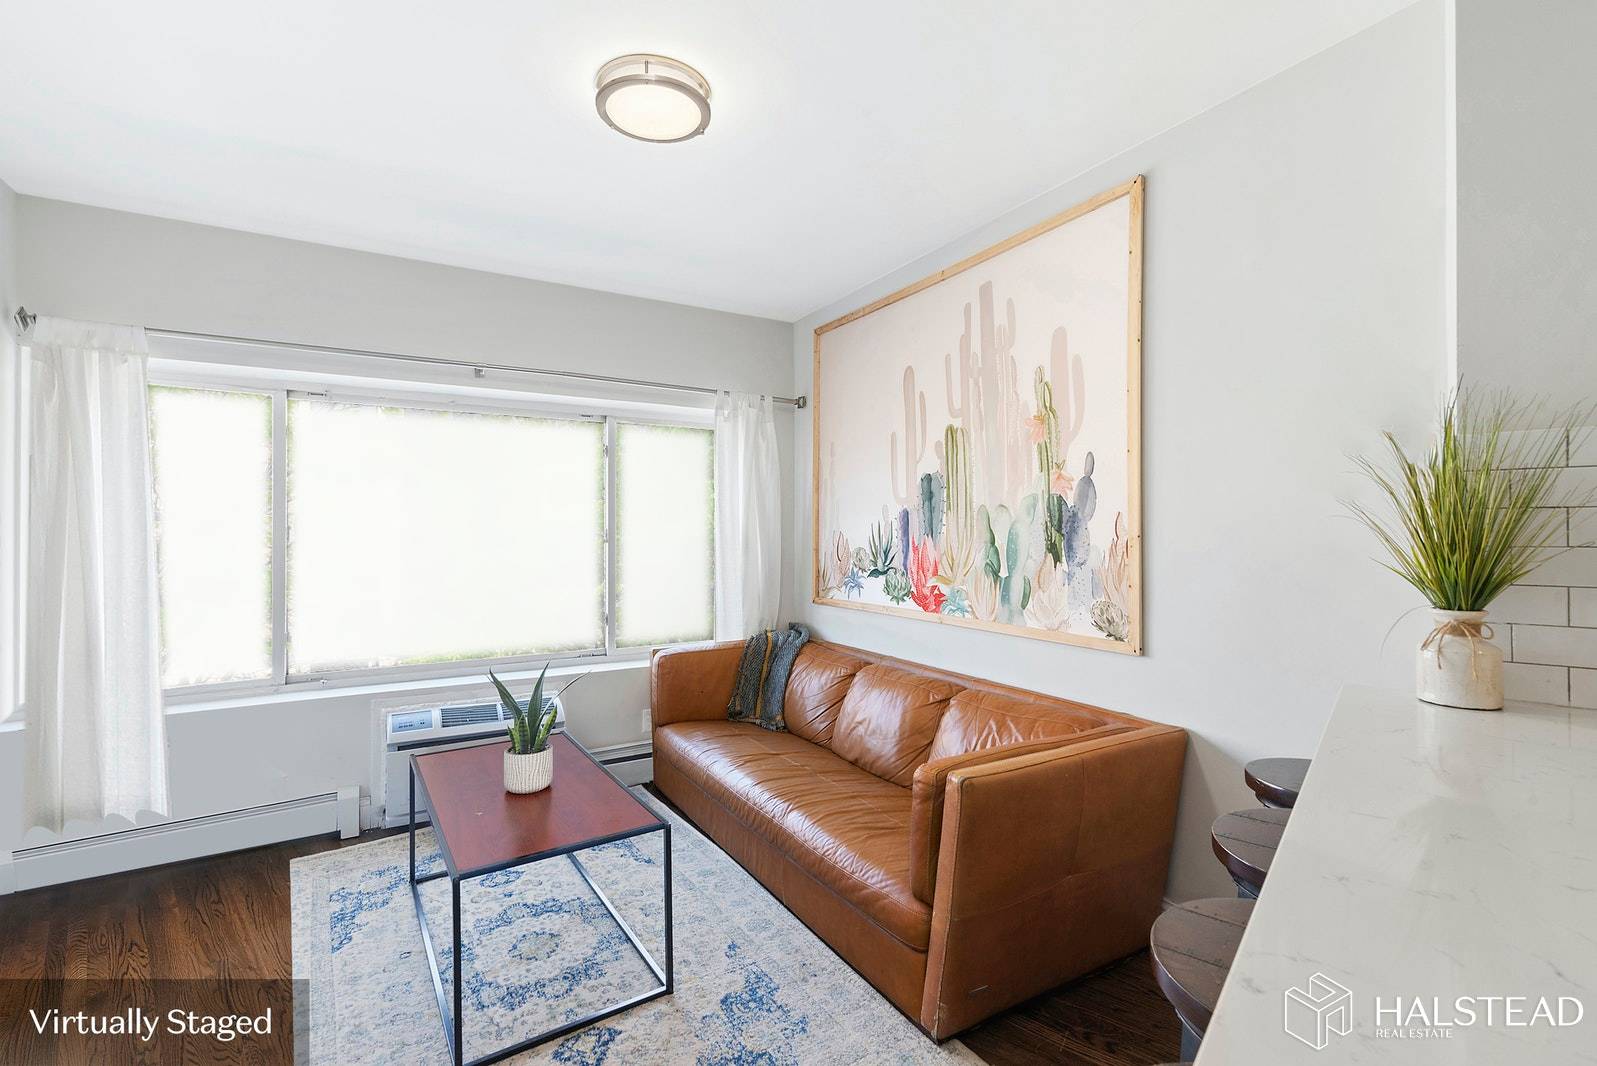 Situated at the corner of Skillman Avenue, 185 Woodpoint offers 4 free market residential units equipped with eight bedrooms and four and half bathrooms.